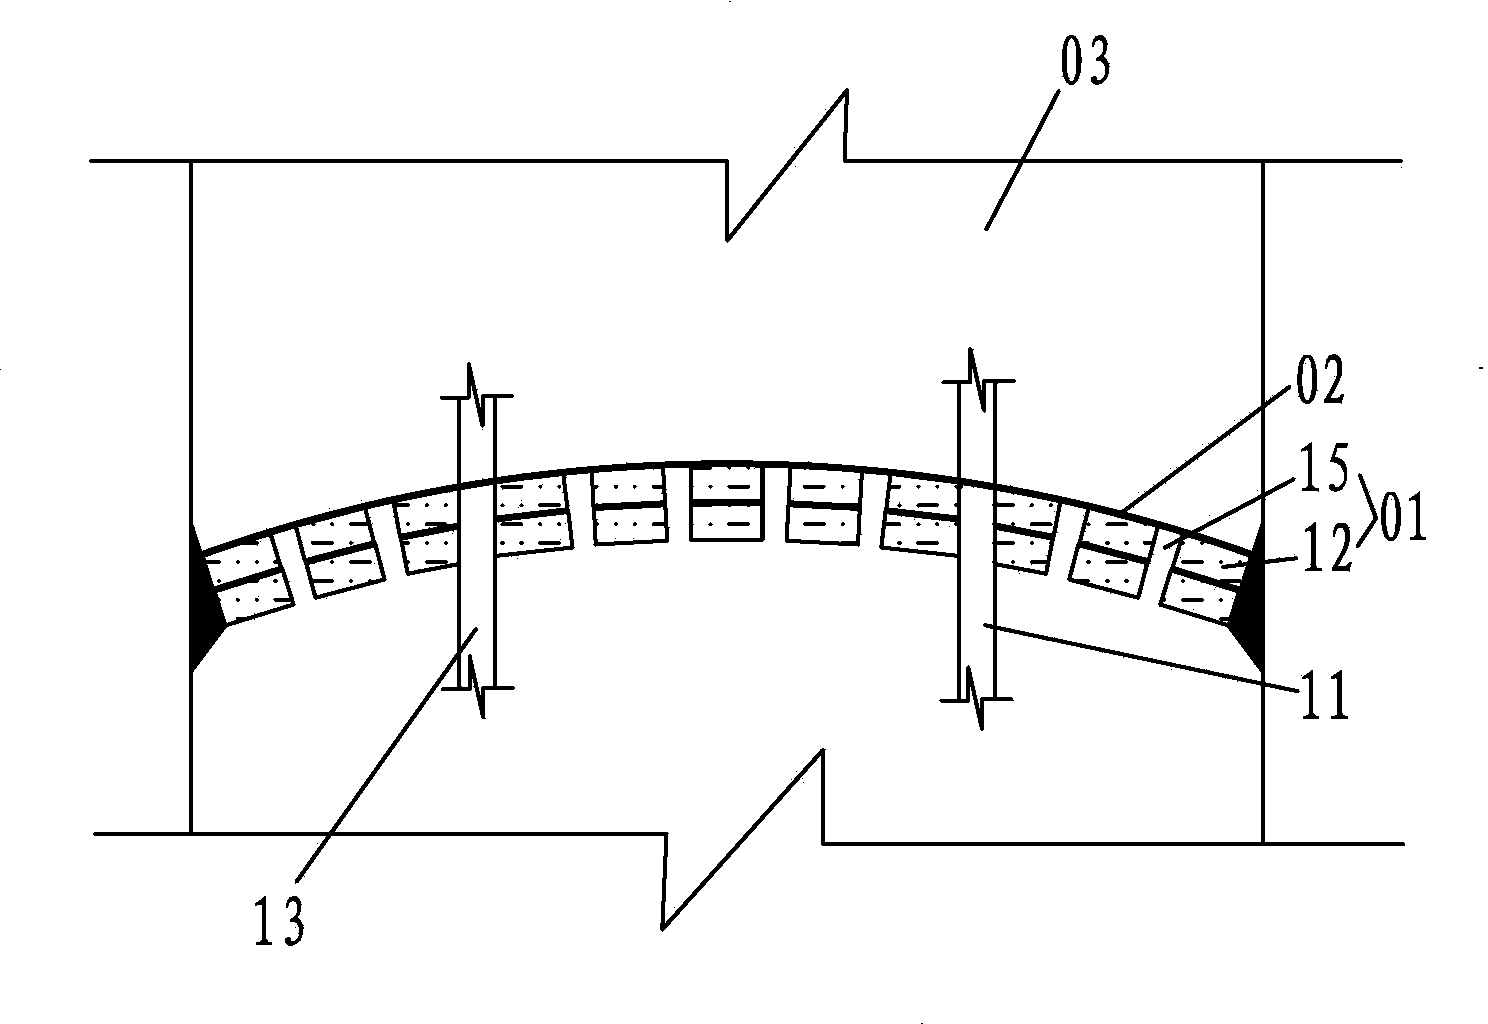 Water drainage wall adopting brick structure and used in cut-and-fill stoping method